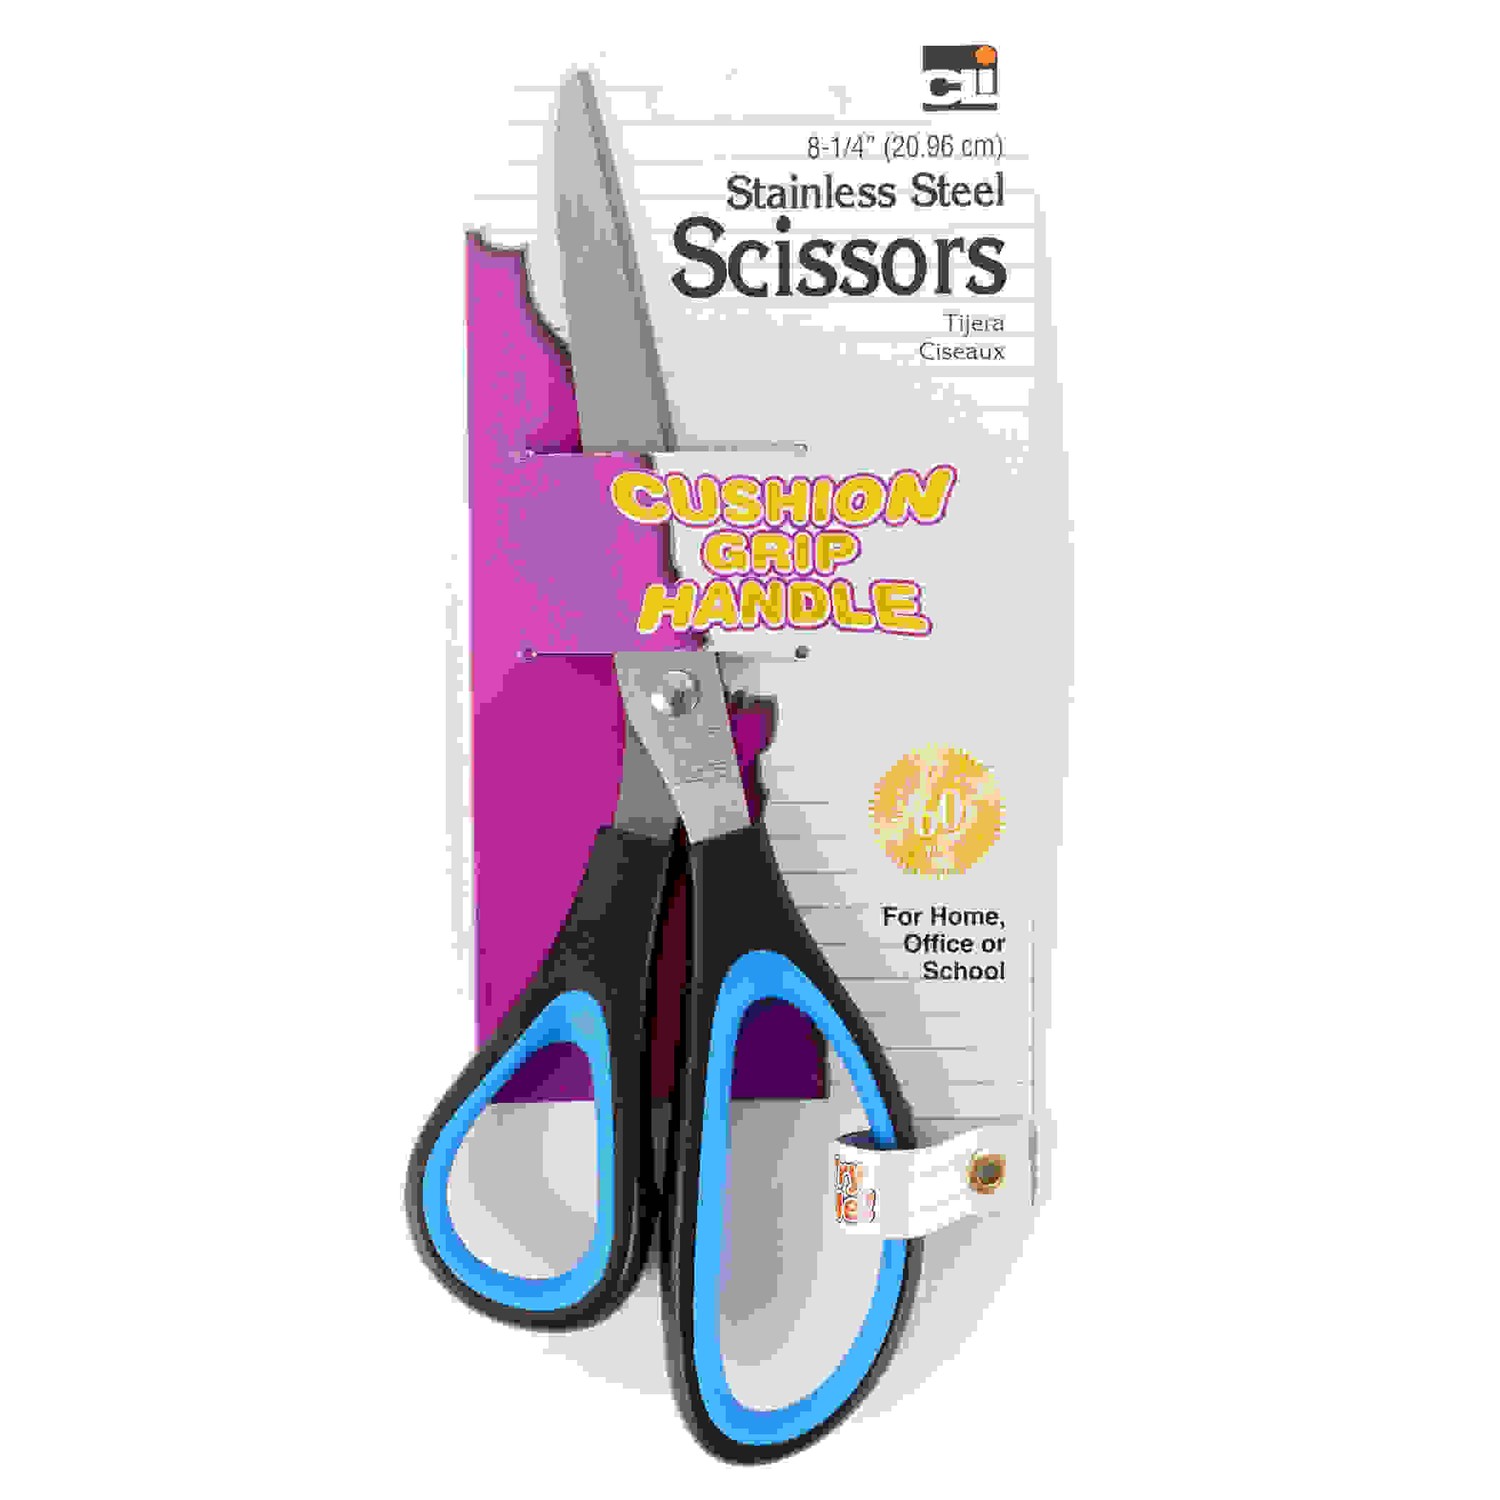 Stainless Steel Scissors with Cushion Grip Handle, 8-1/4" Straight, Blue/Black